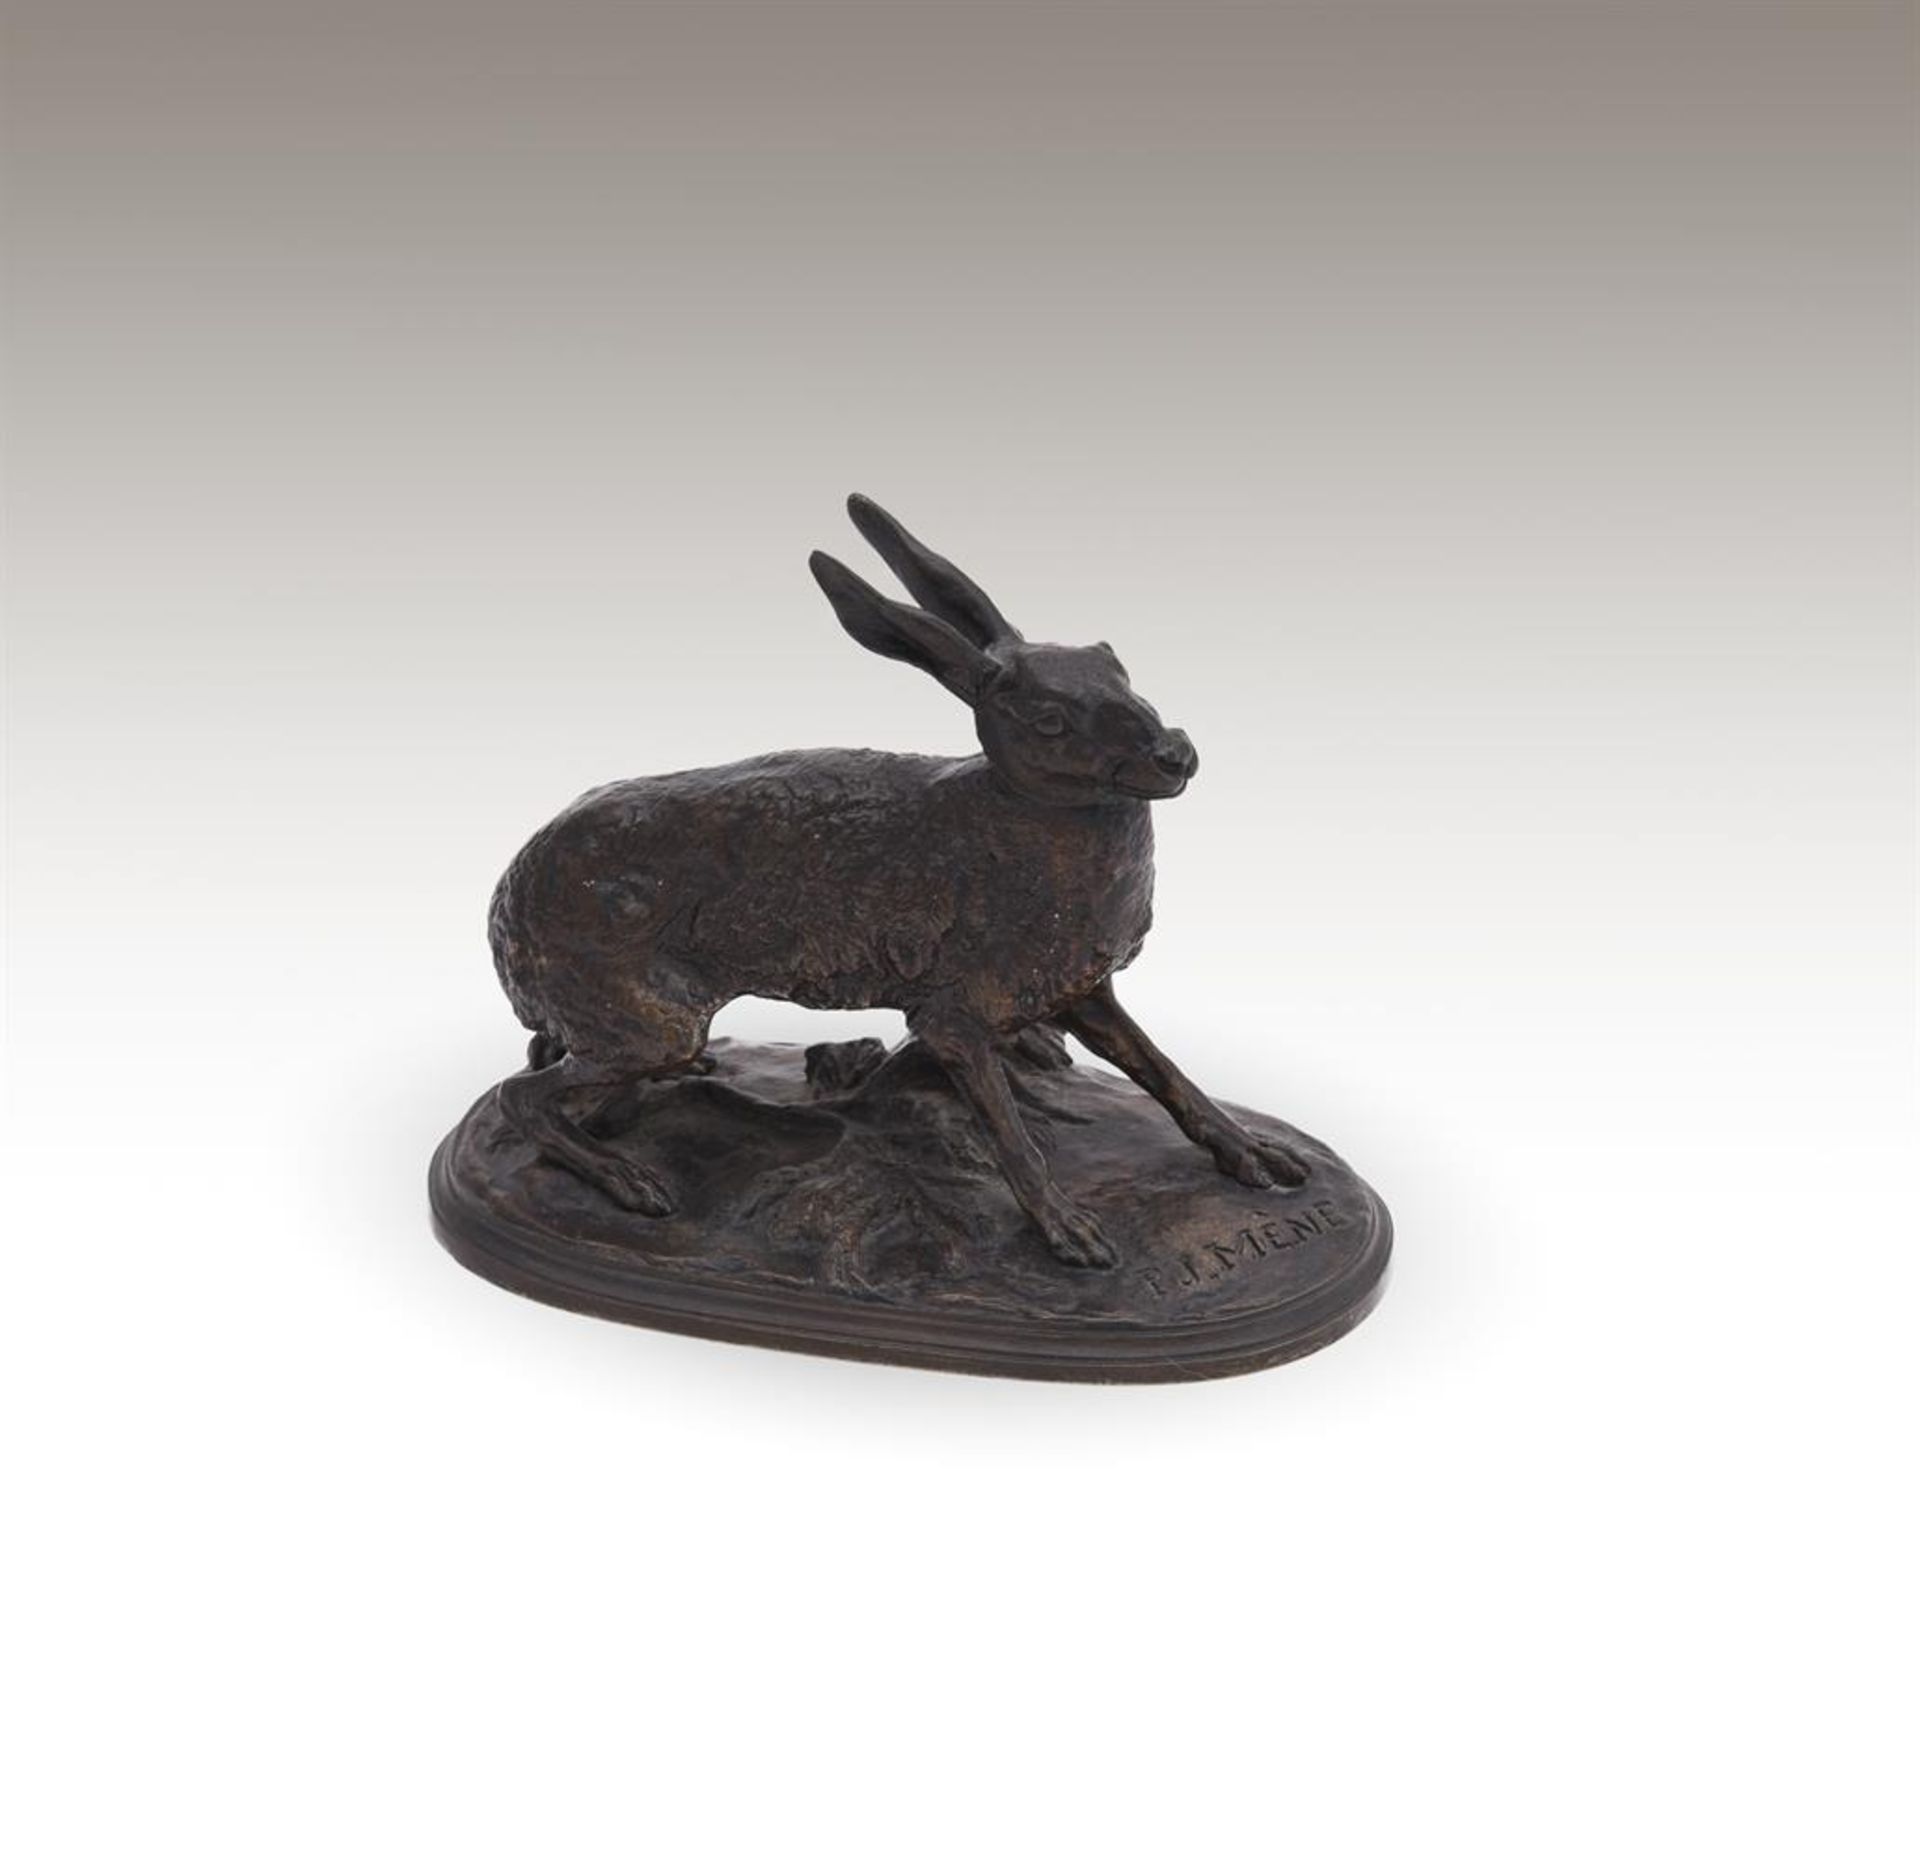 PIERRE-JULES MÊNE (FRENCH, 1810-1879), A BRONZE MODEL OF AN ALERT HARE - Image 5 of 5